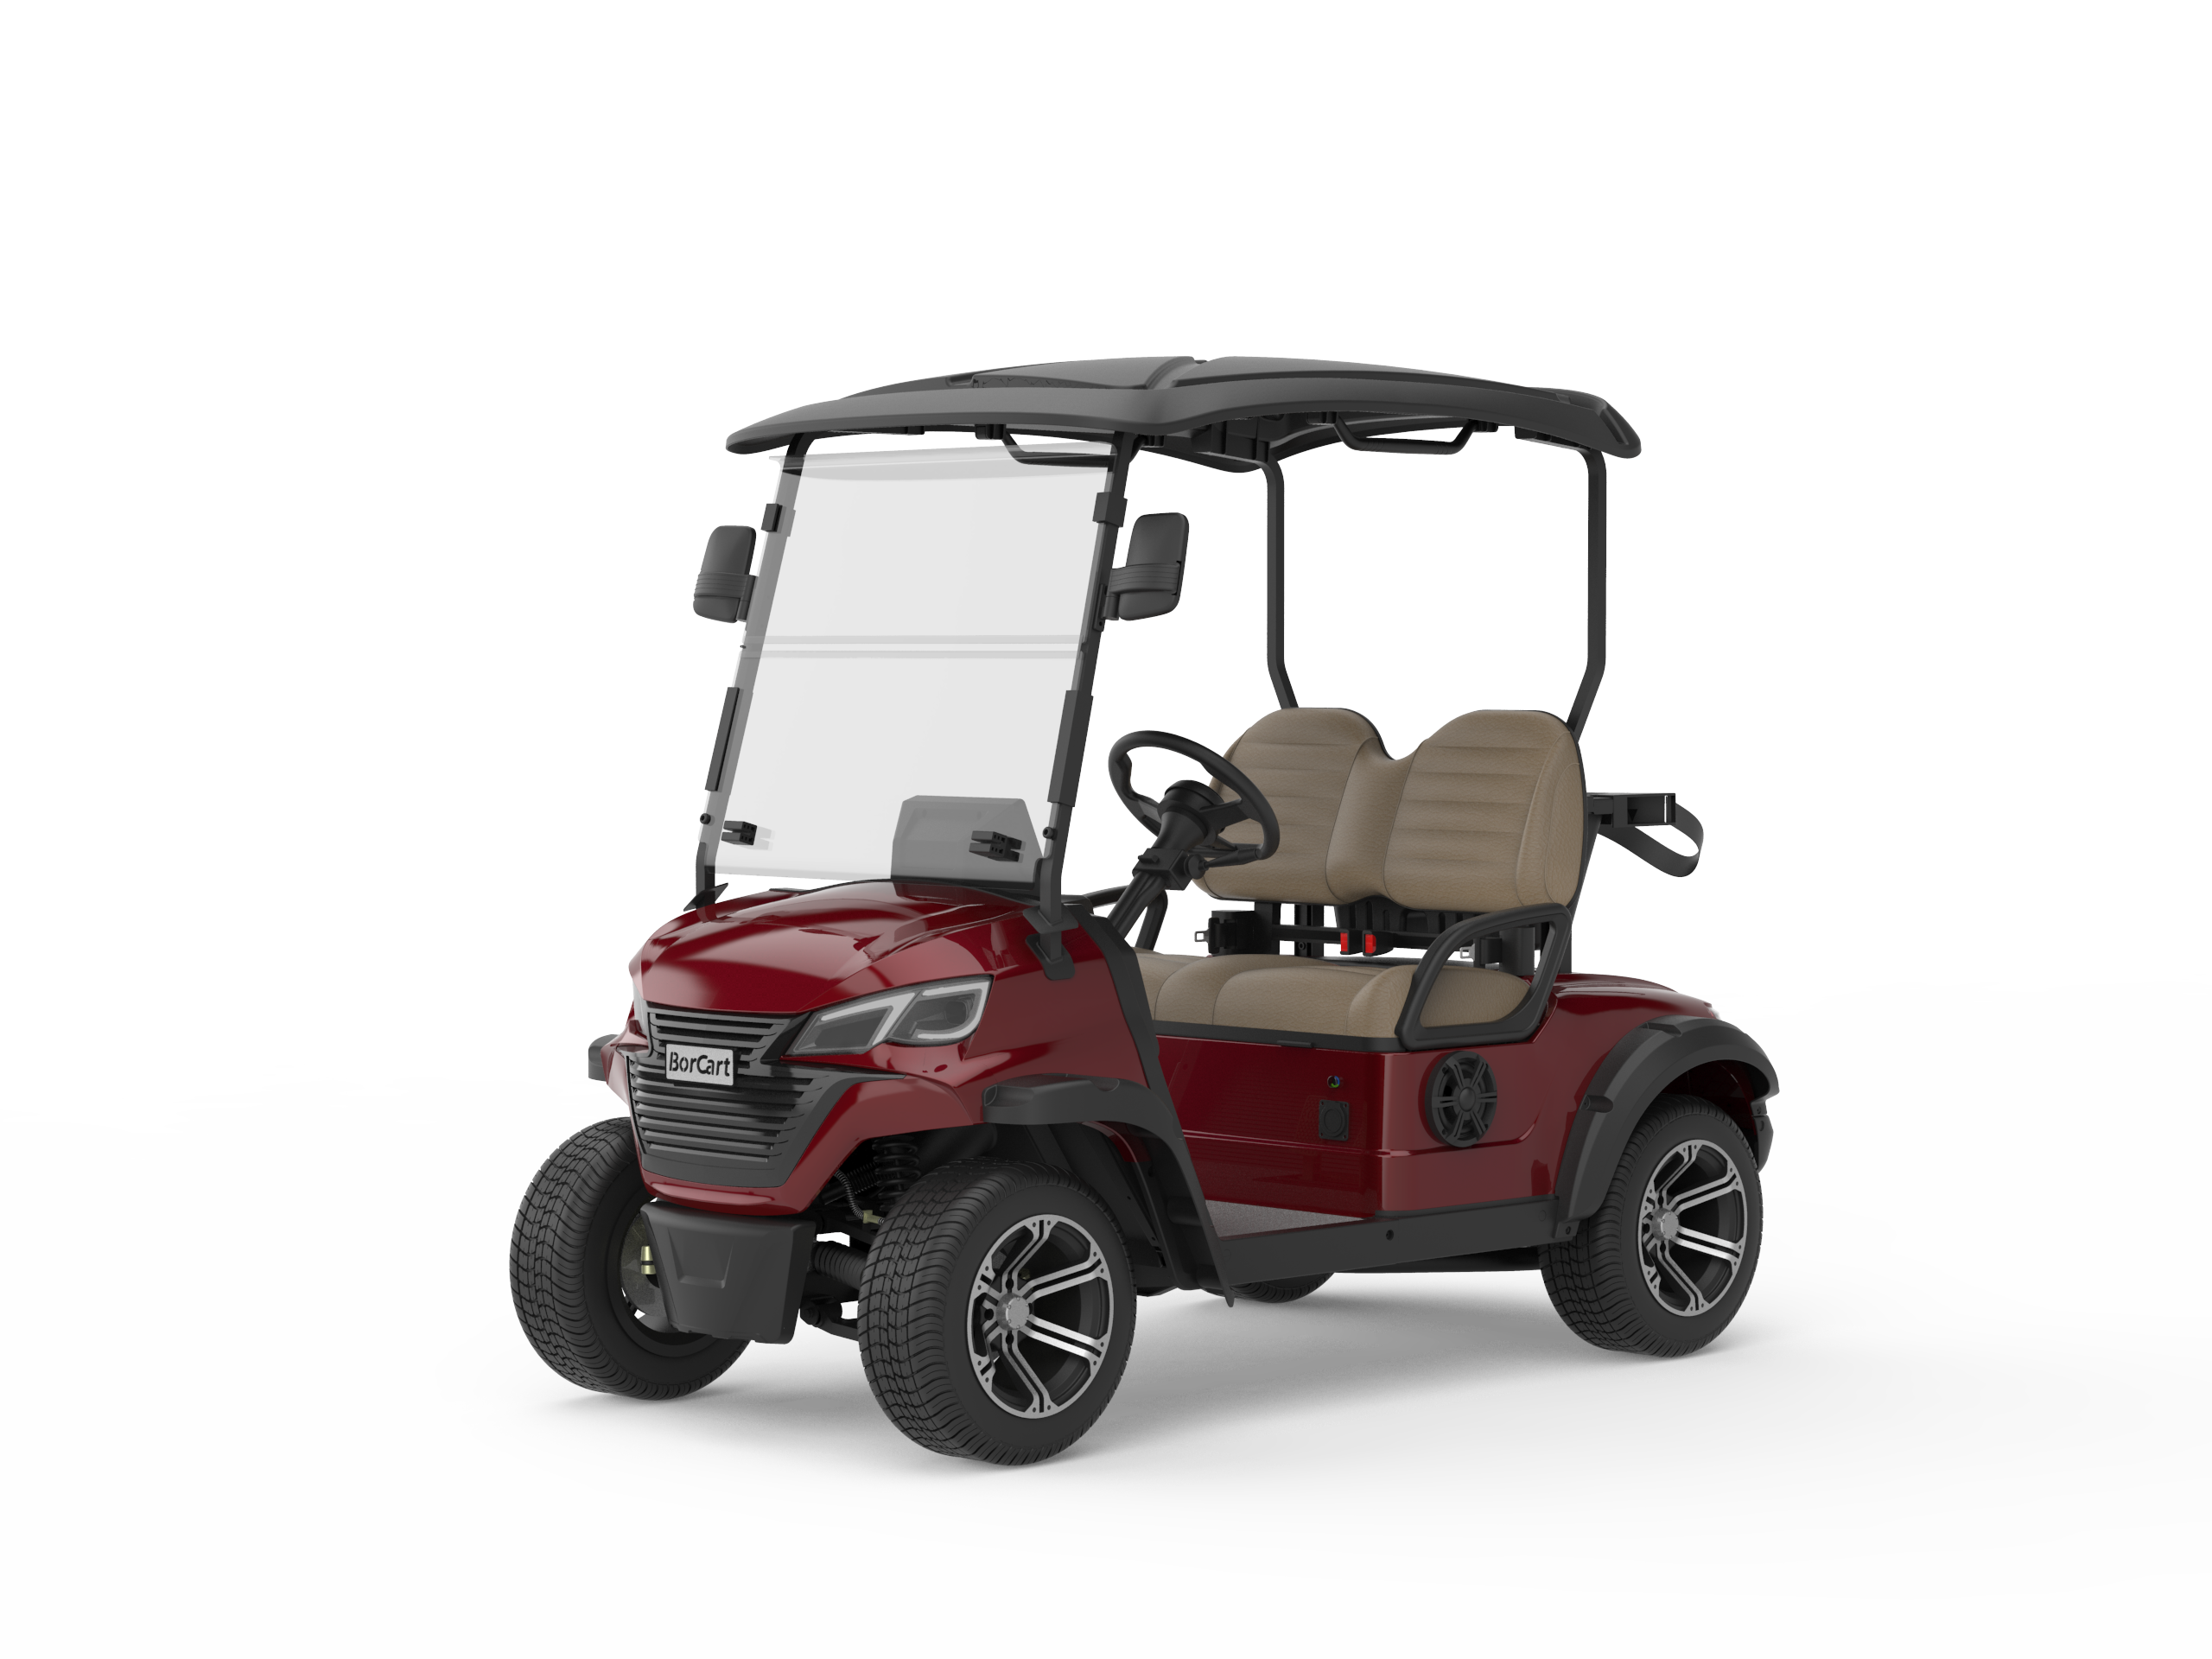 Manufacturer No lifted Electric Golf Car C2 2 Seater Small LSV Low Speed Vehicle Golf Cart